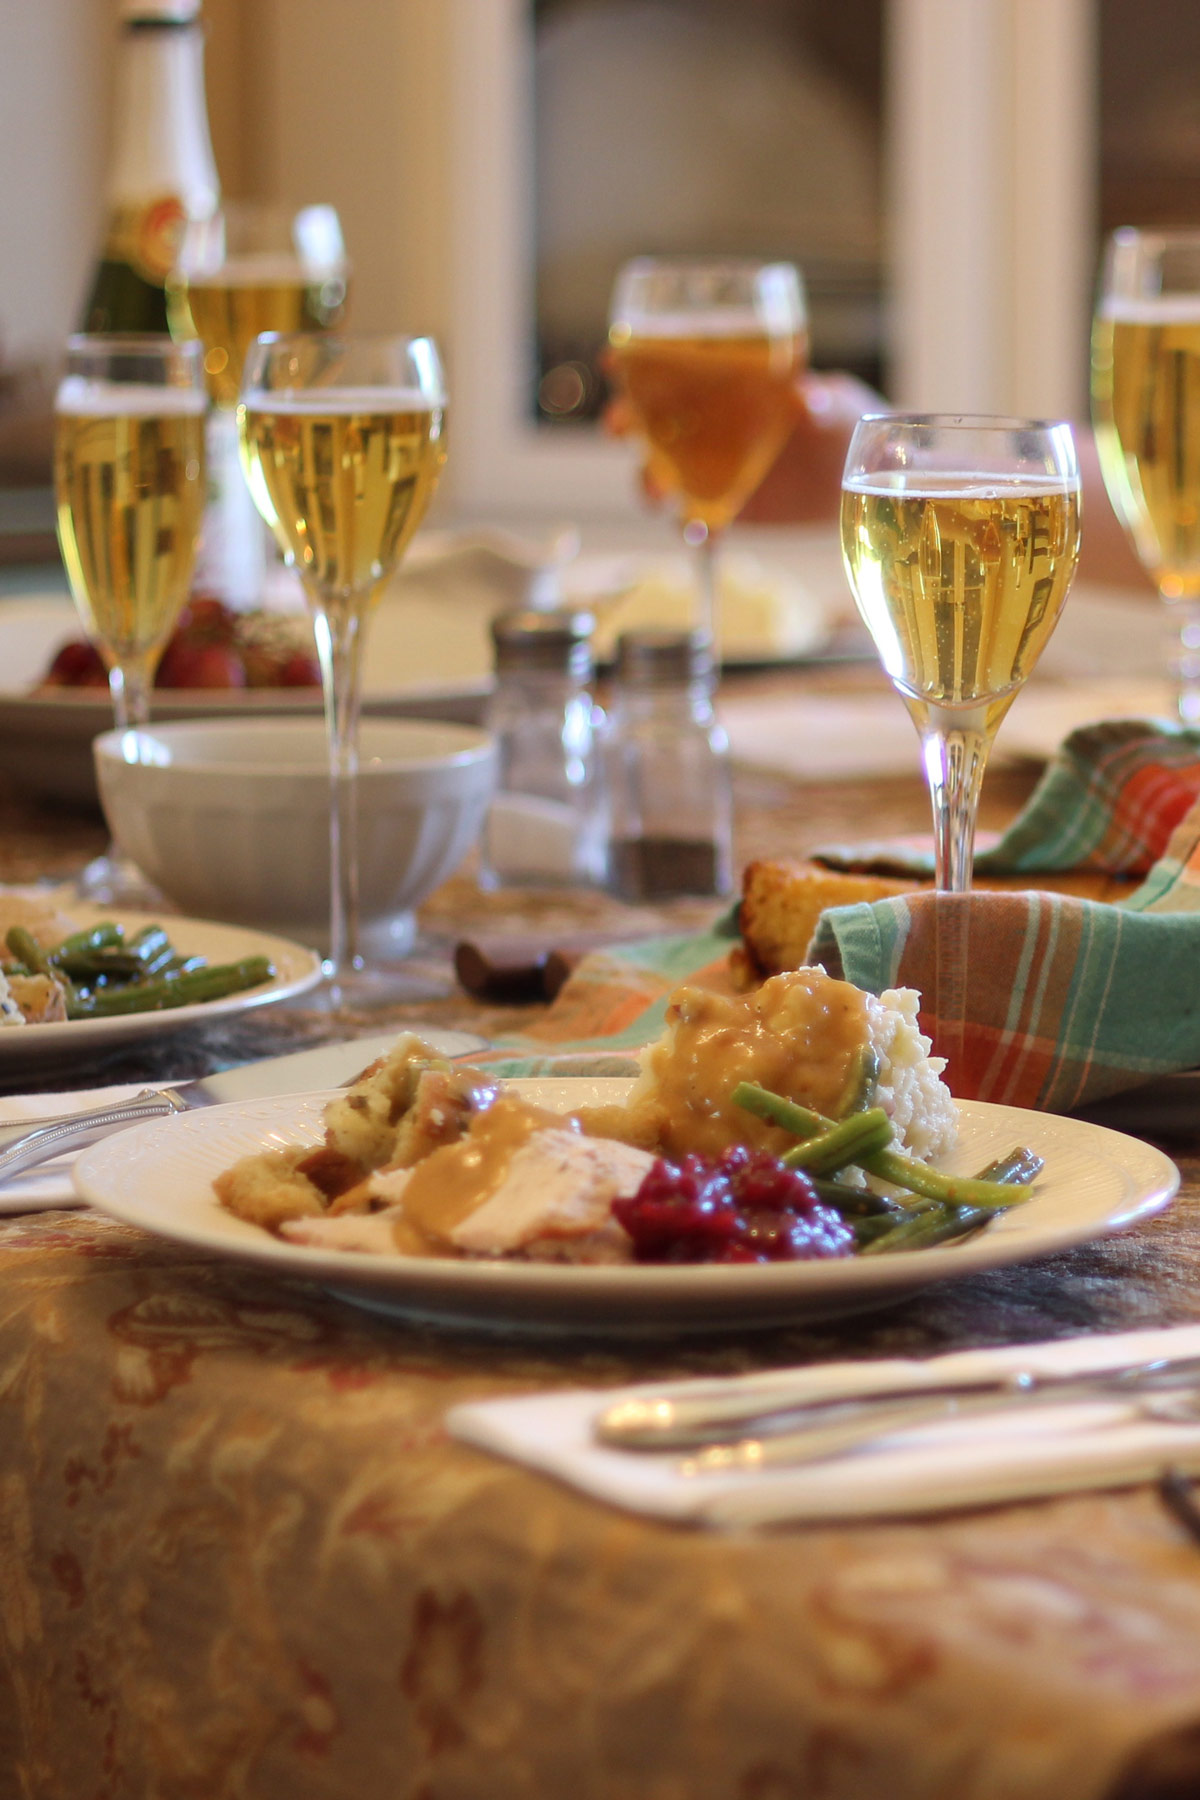 table set with gold tablecloth, full plates of food, and goblets filled with wine or sparkling apple cider.